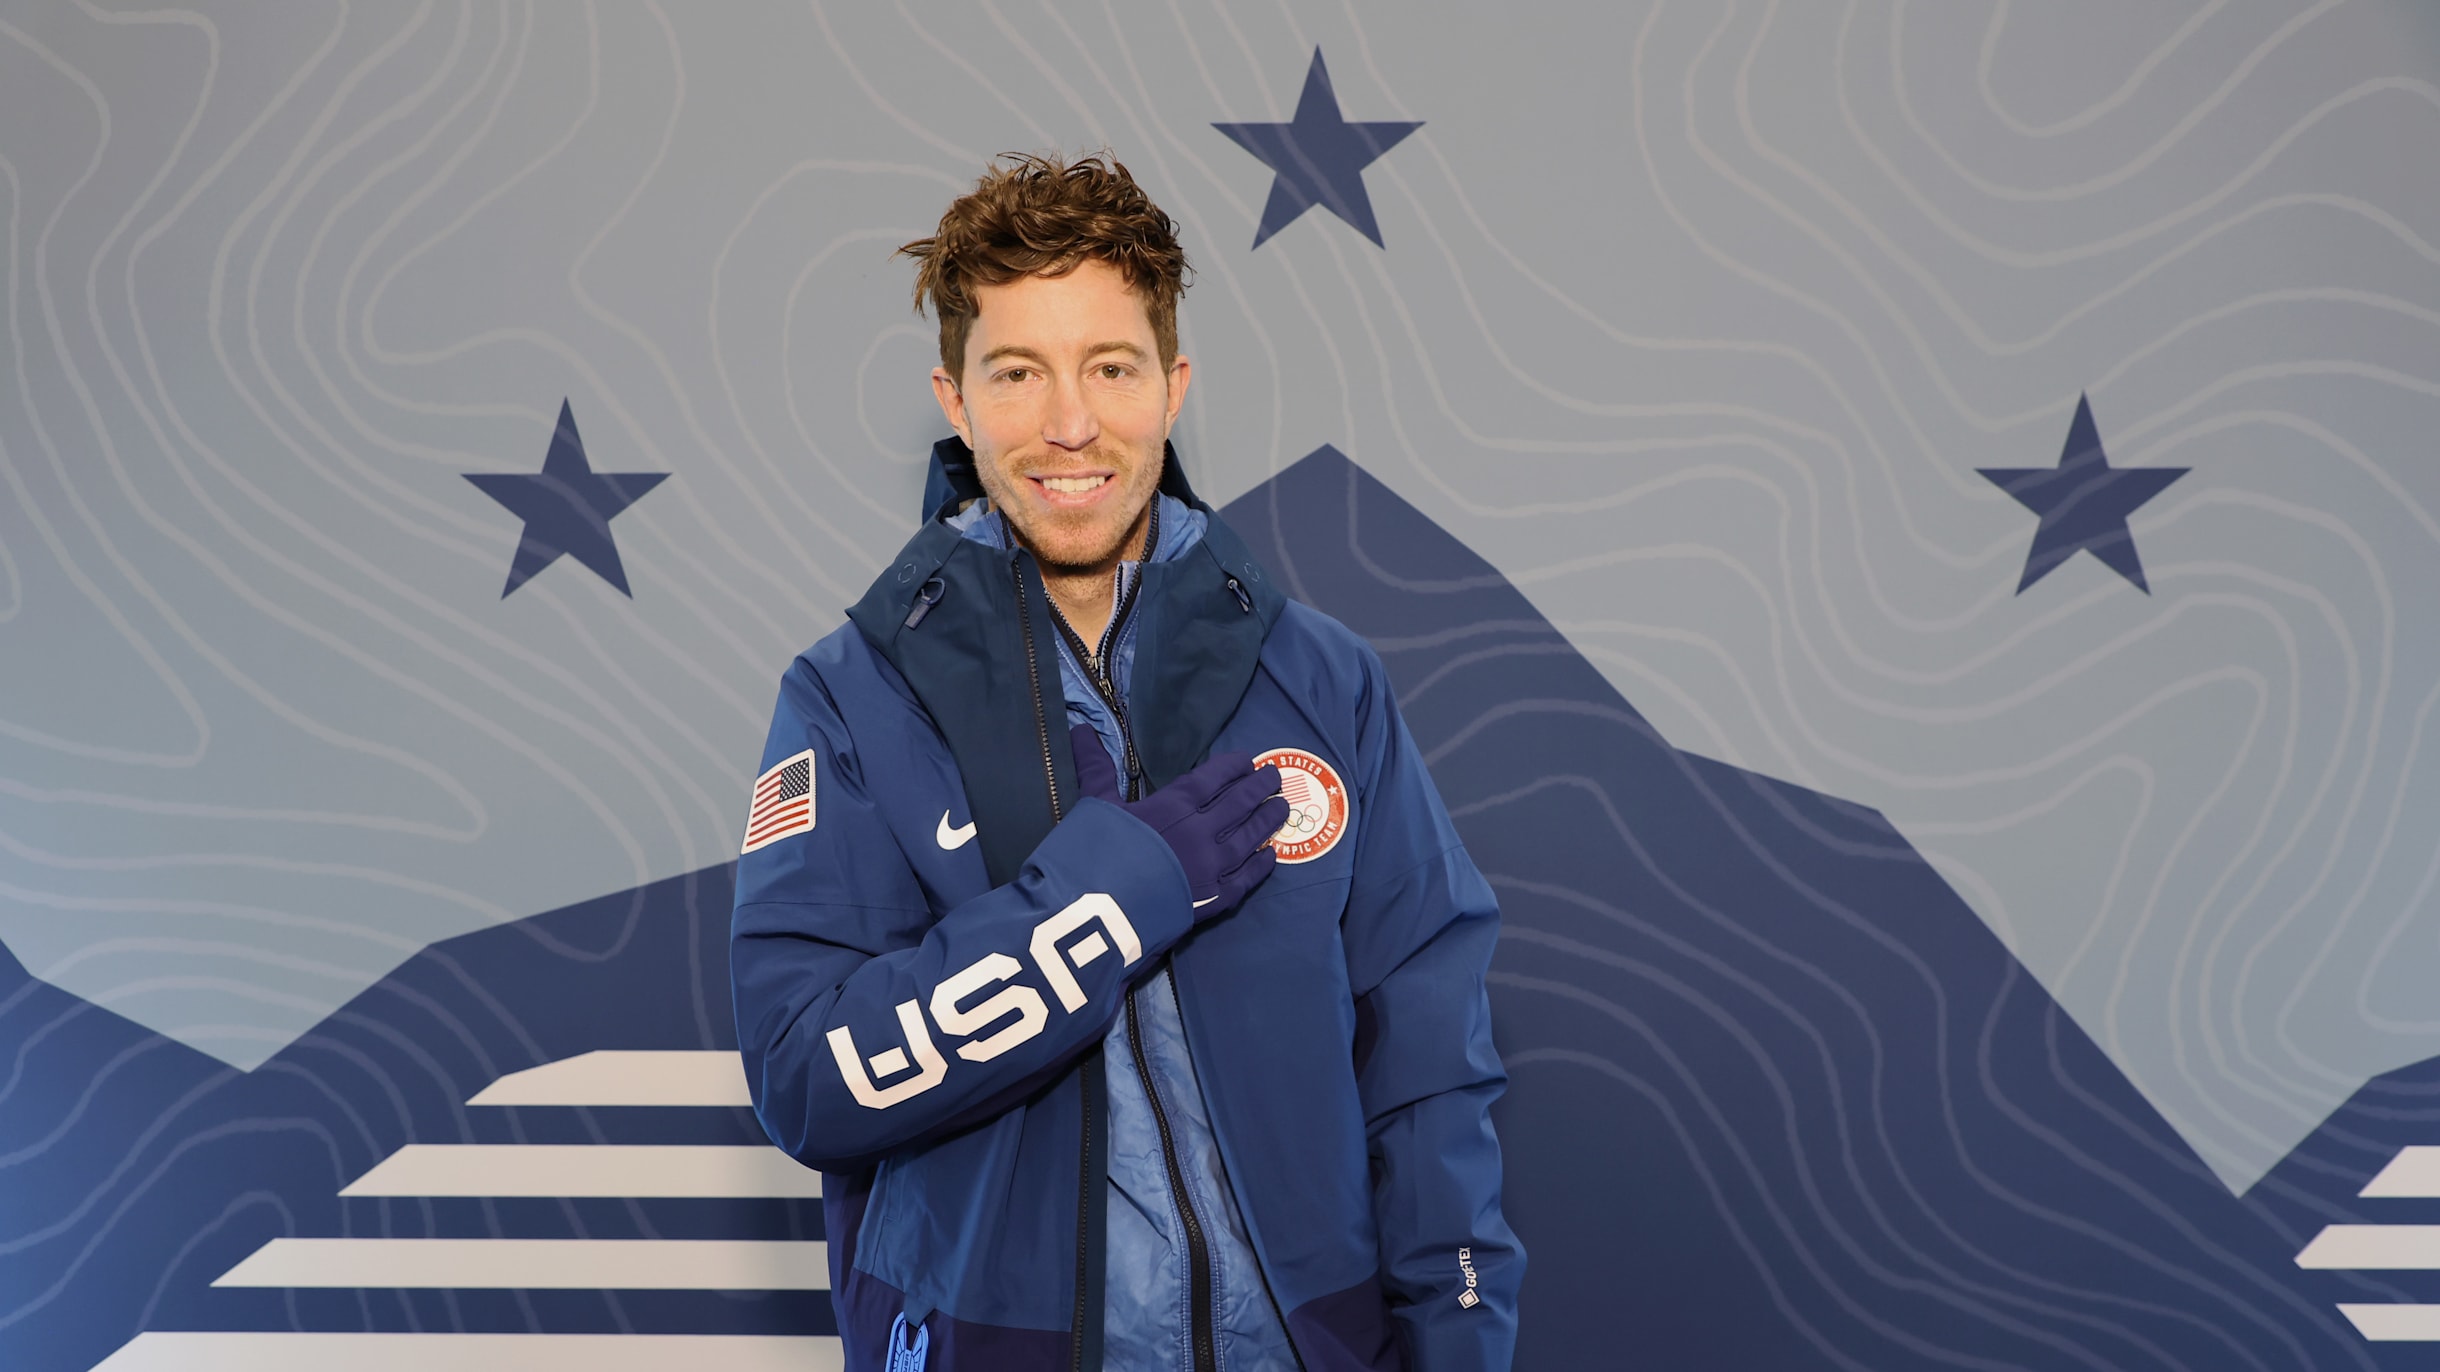 Did Shaun White win gold in his final Winter Olympics?